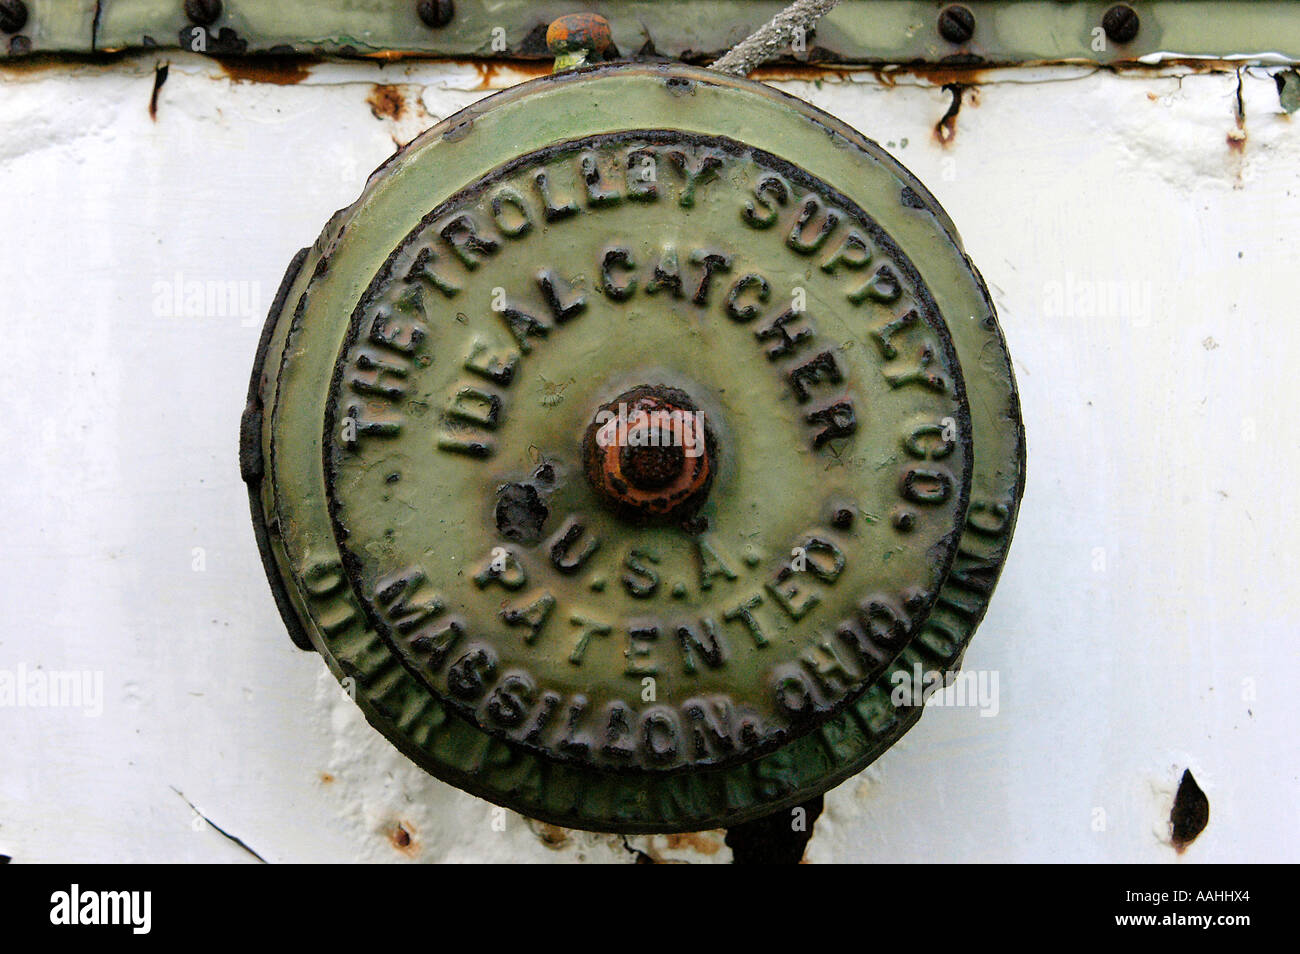 Trolley Supply Co. Metal Ideal Catcher Plate Stock Photo